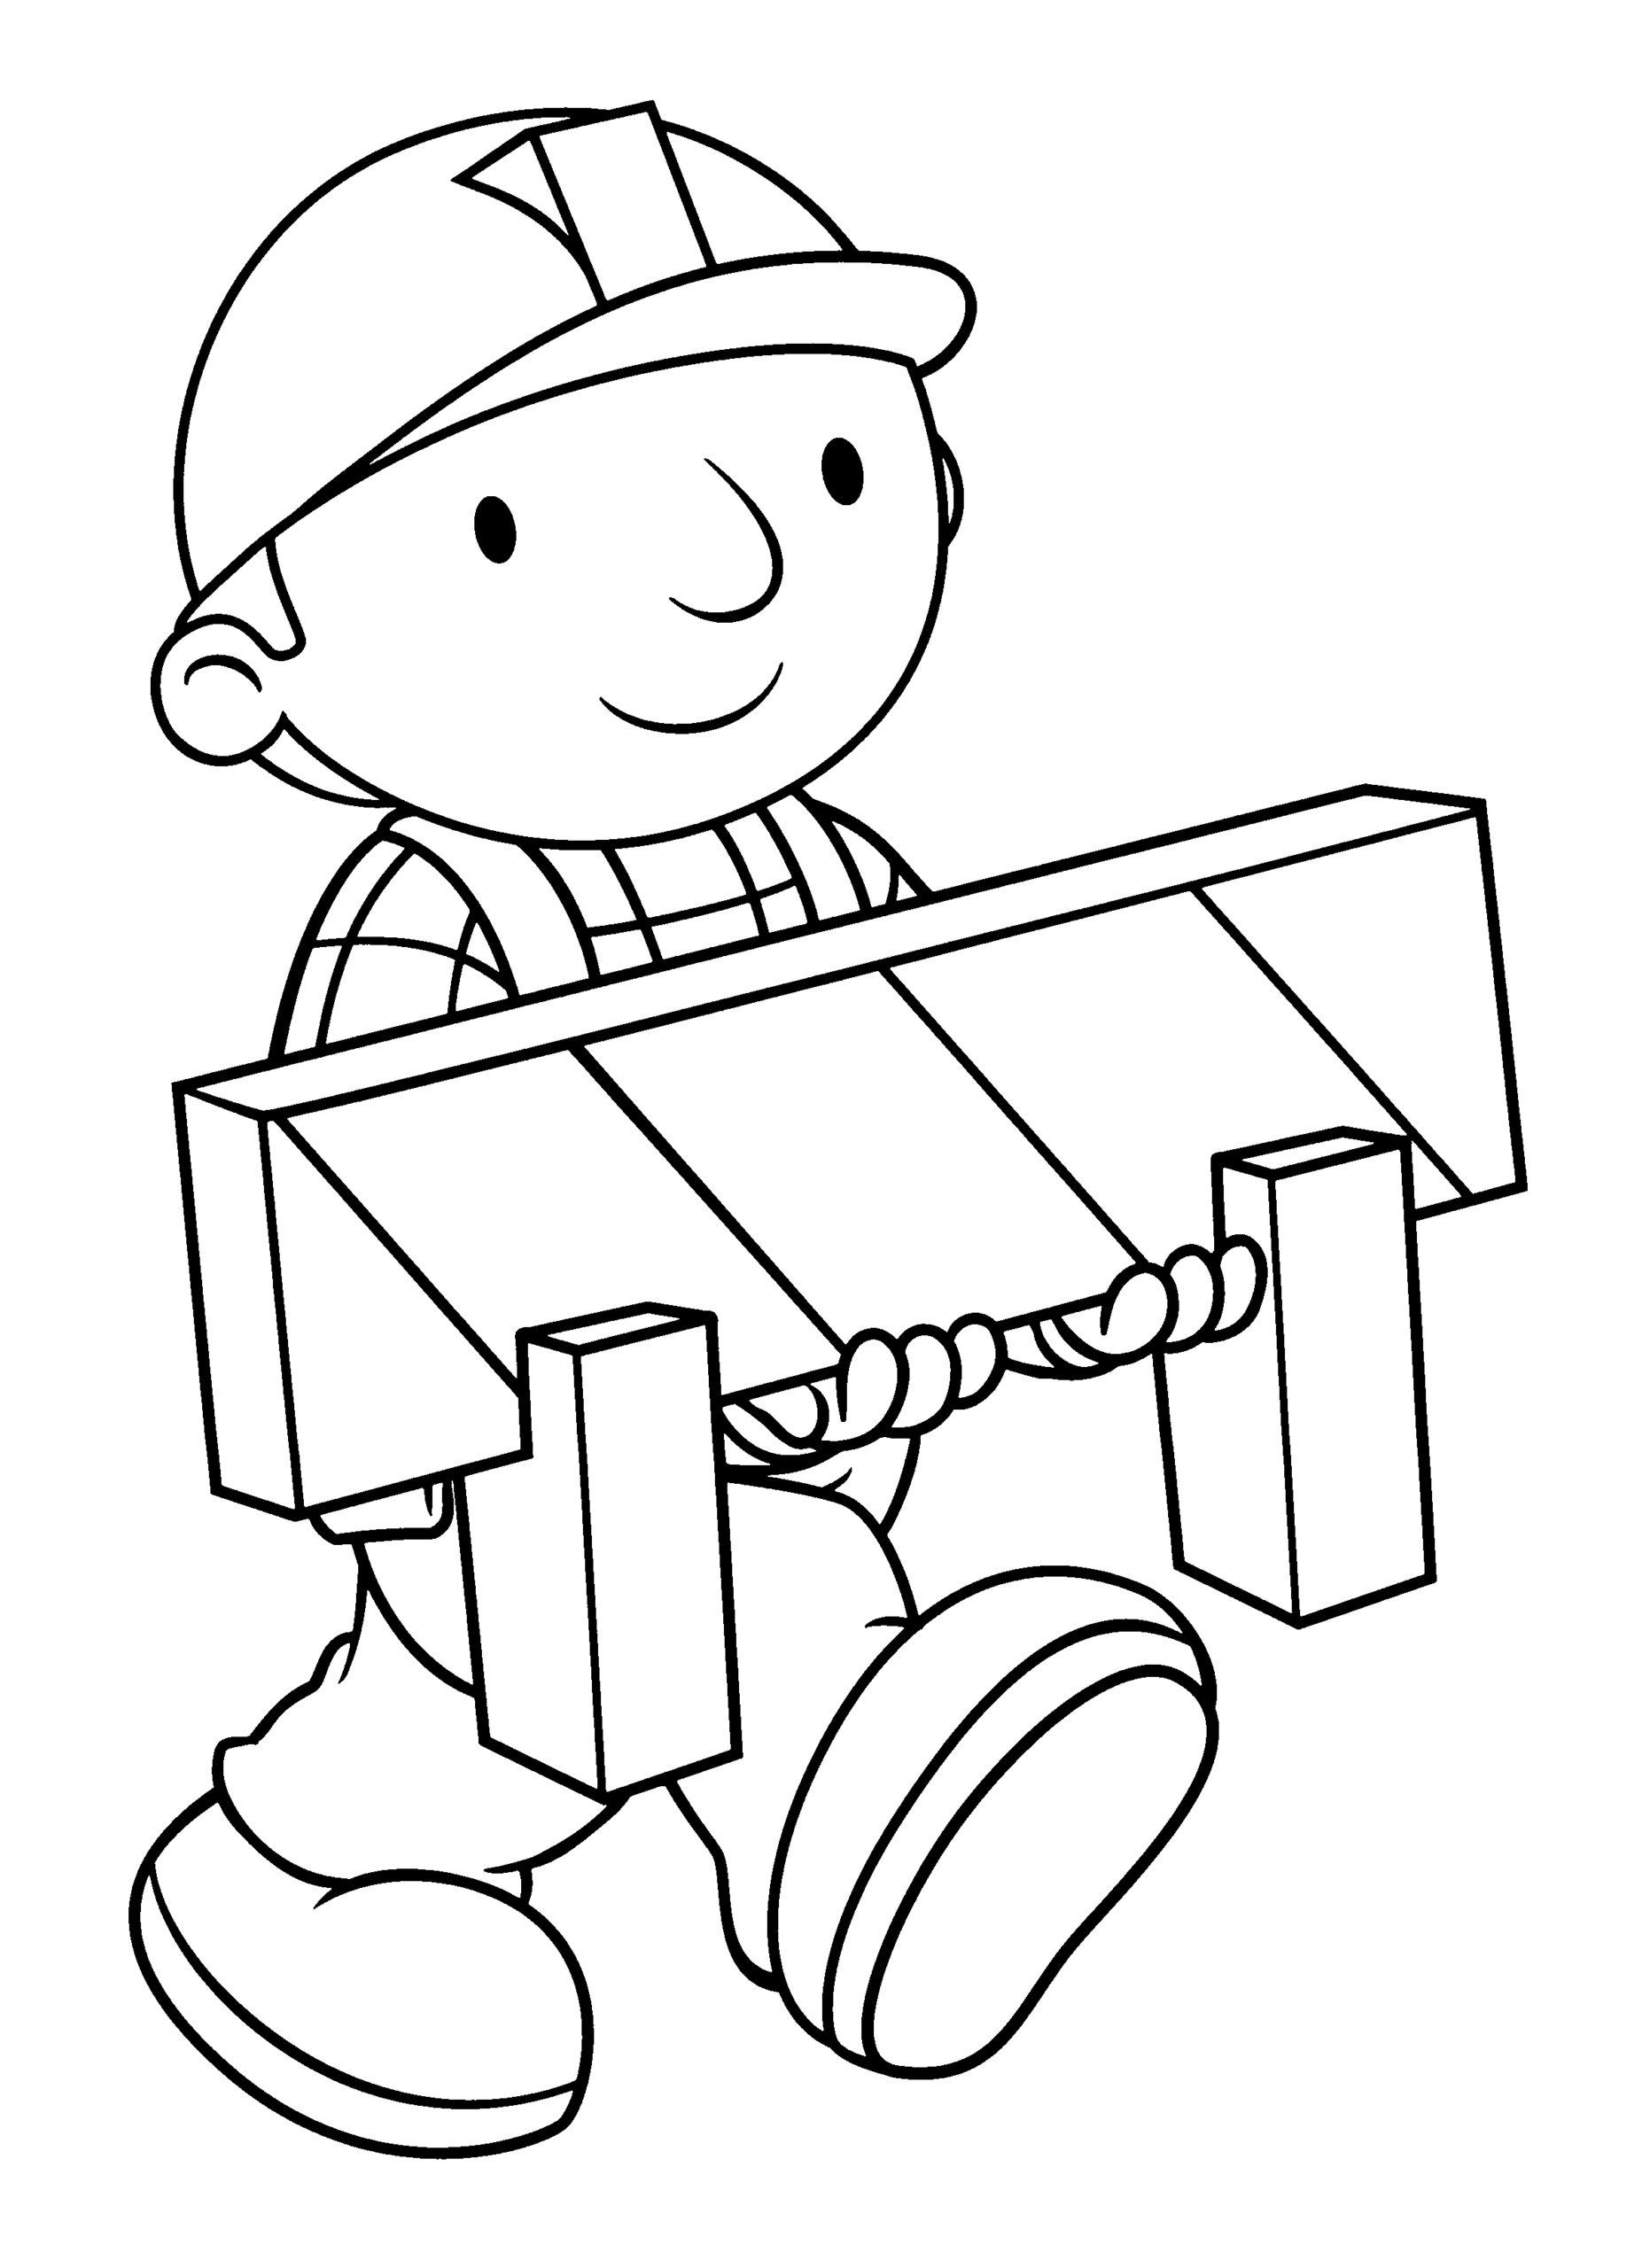 Bob the Builder Coloring Pages TV Film Pictures of Bob The Builder Printable 2020 01147 Coloring4free